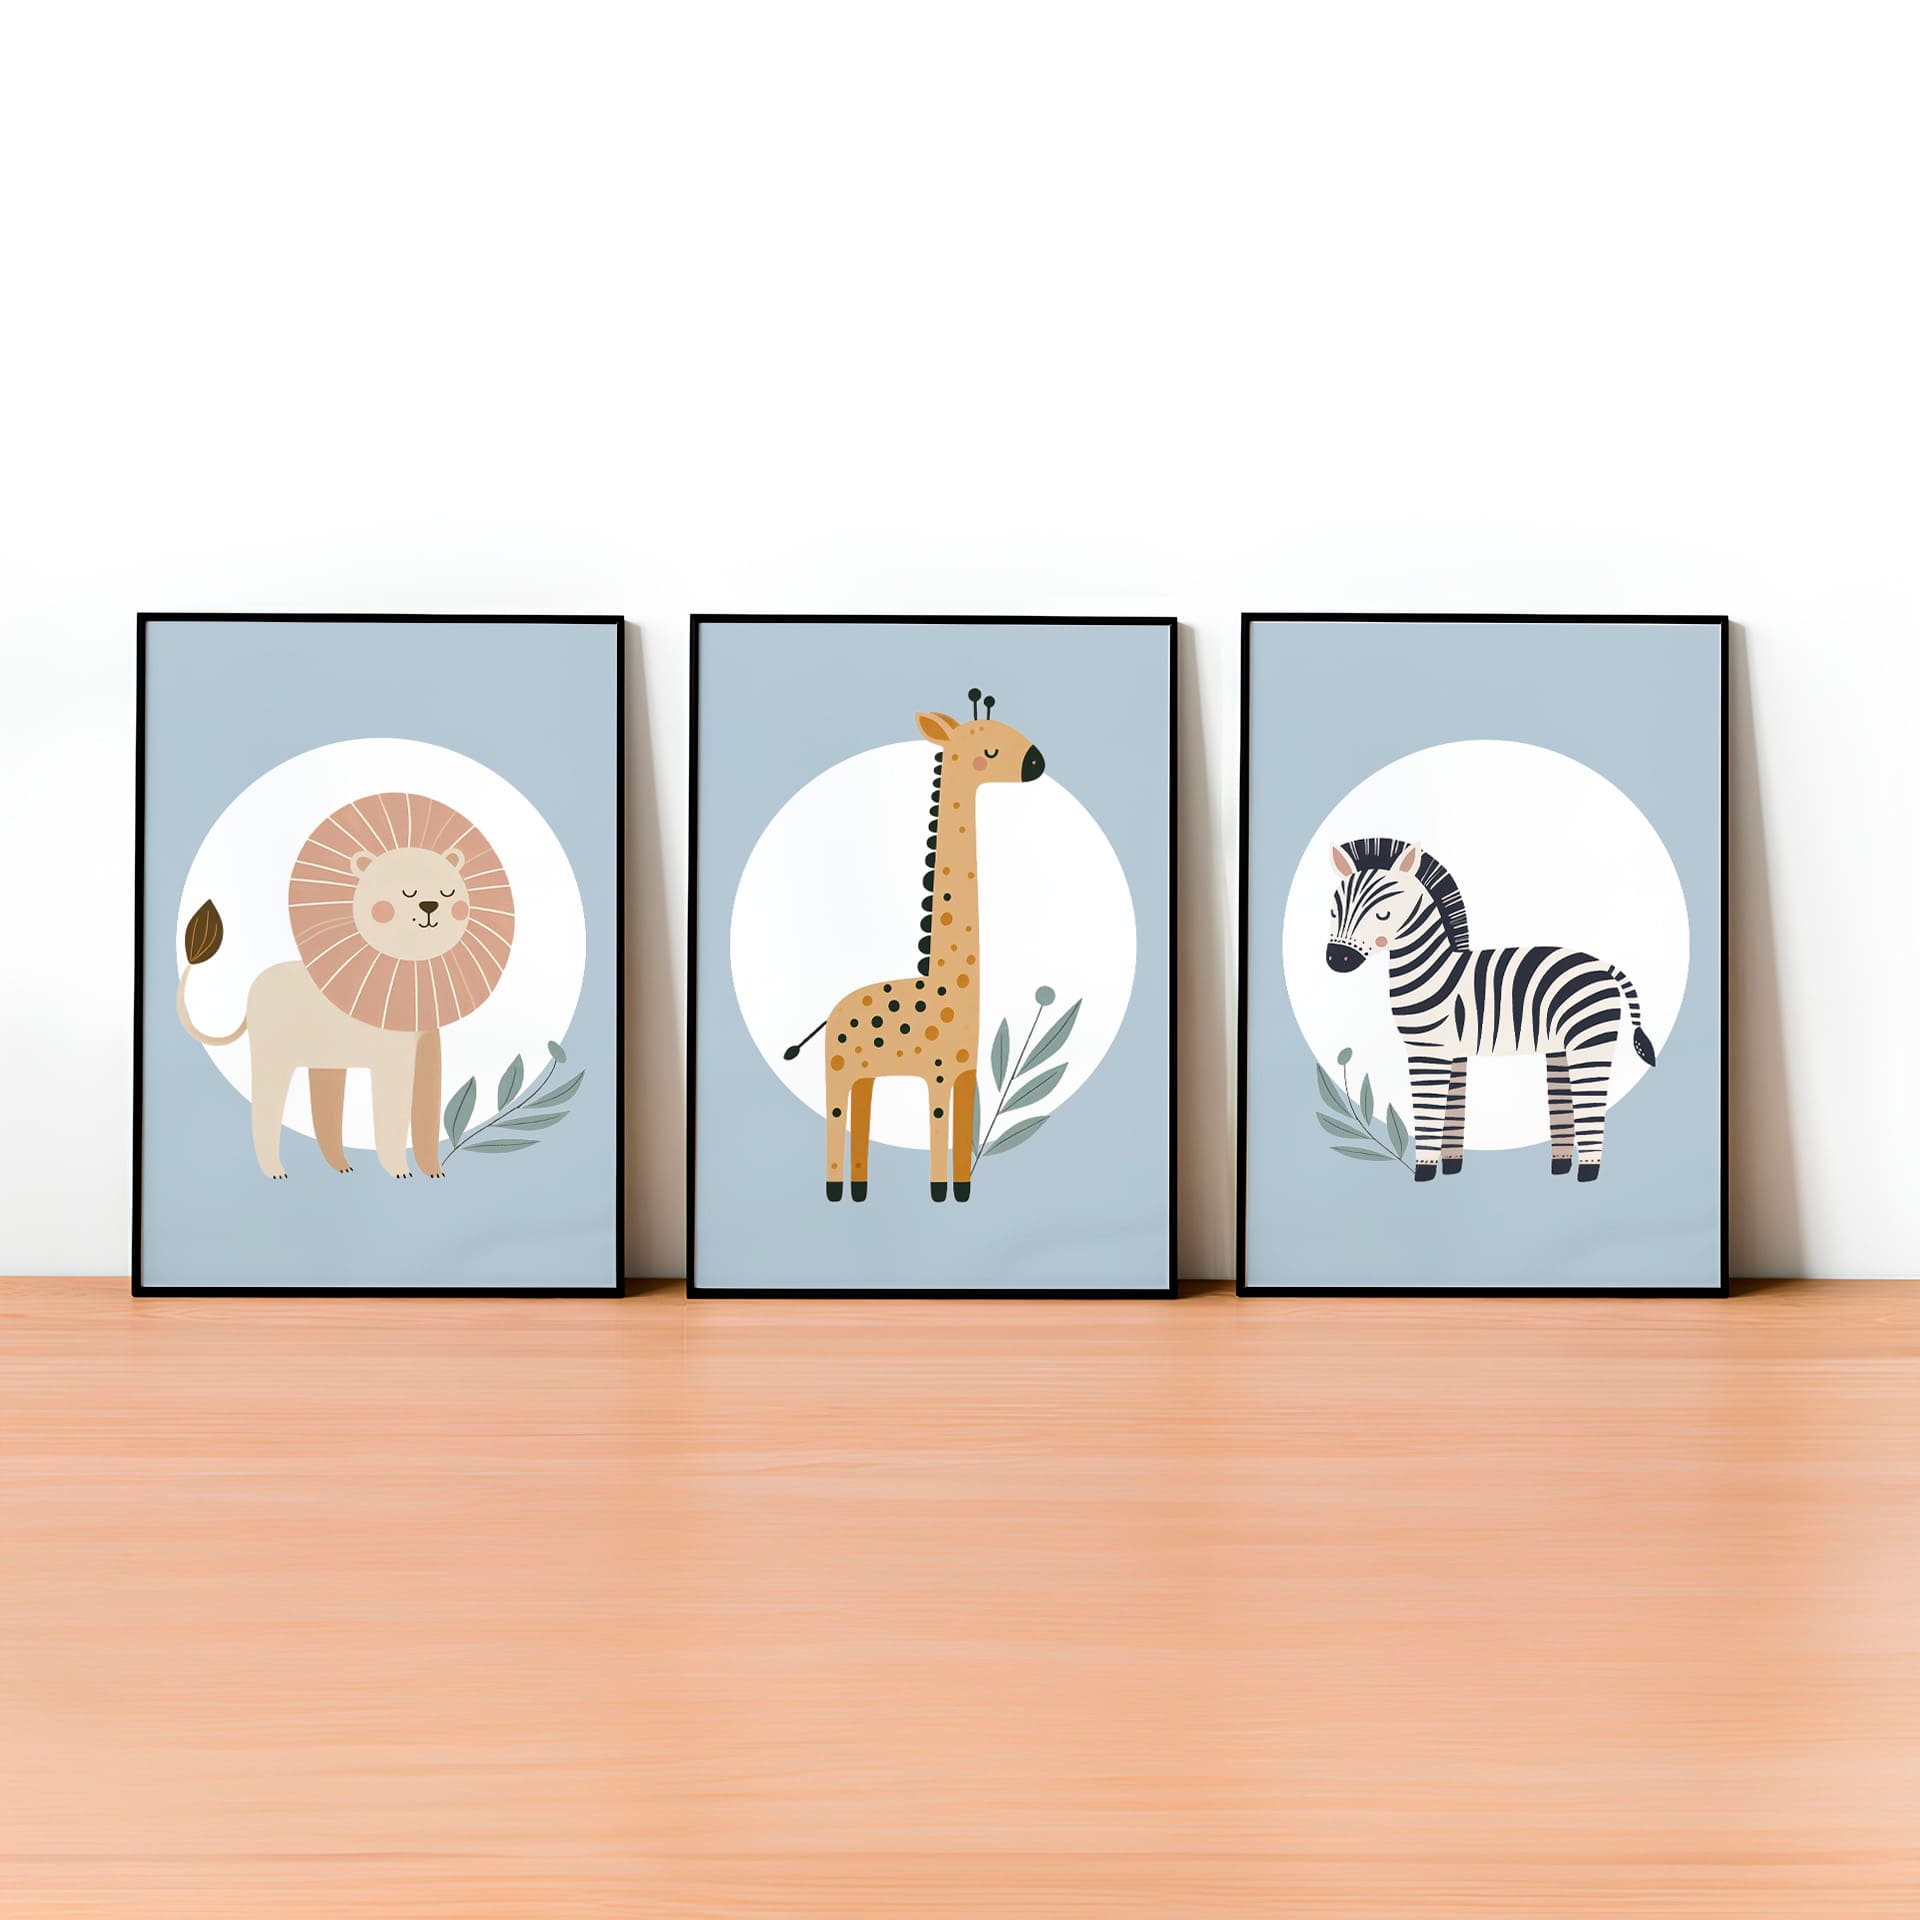 Set of three A4 prints featuring minimalist illustrations in muted tones. Each print depicts a different animal: a lion, a zebra, and a giraffe. The background is pale blue with a white circle on which the animal is overlaid.